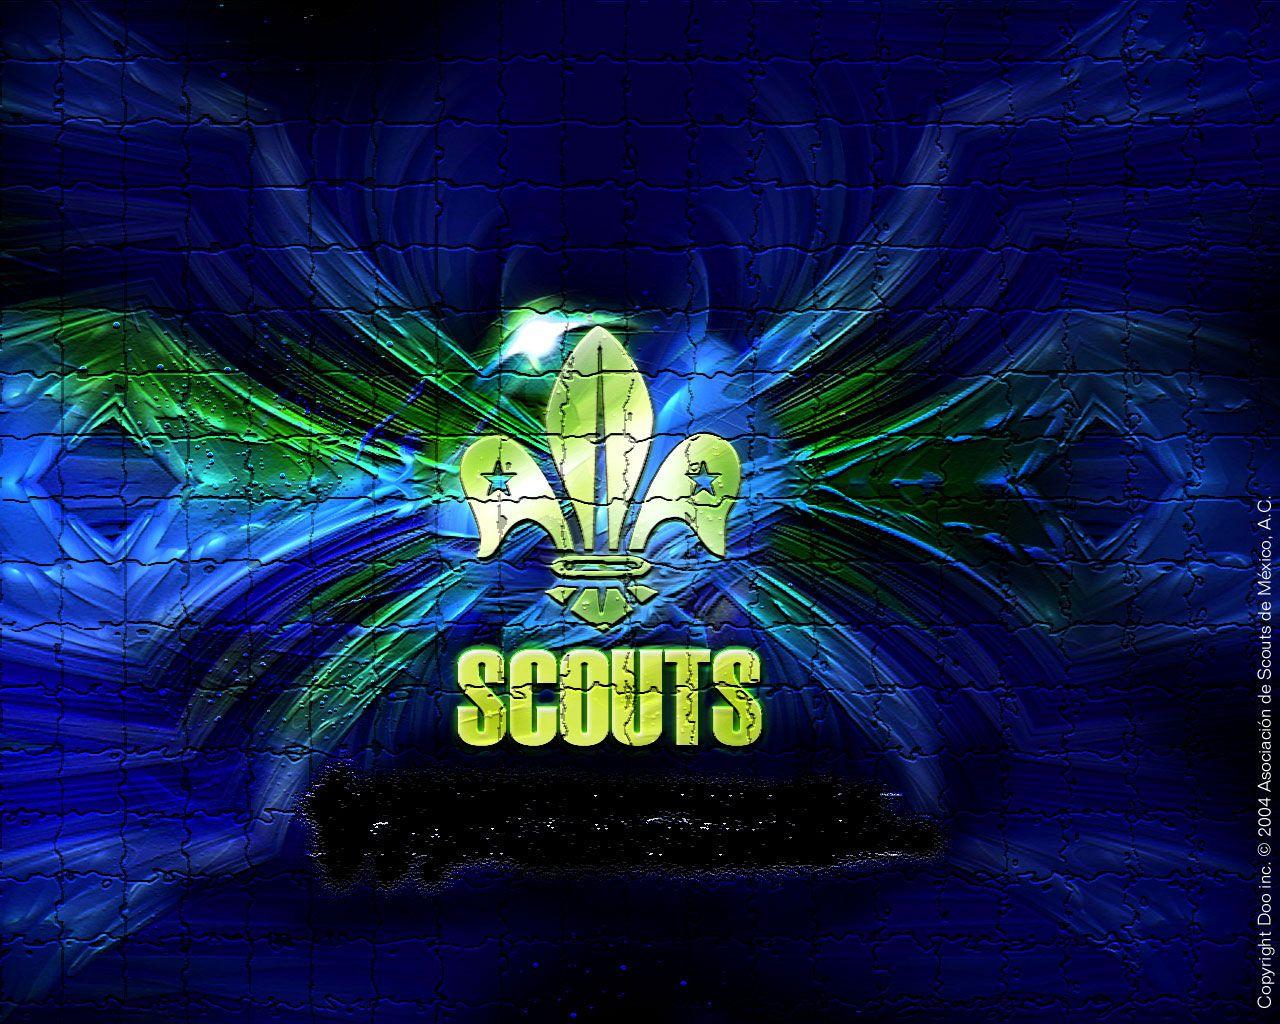 Boy Scouts Wallpapers - Wallpaper Cave